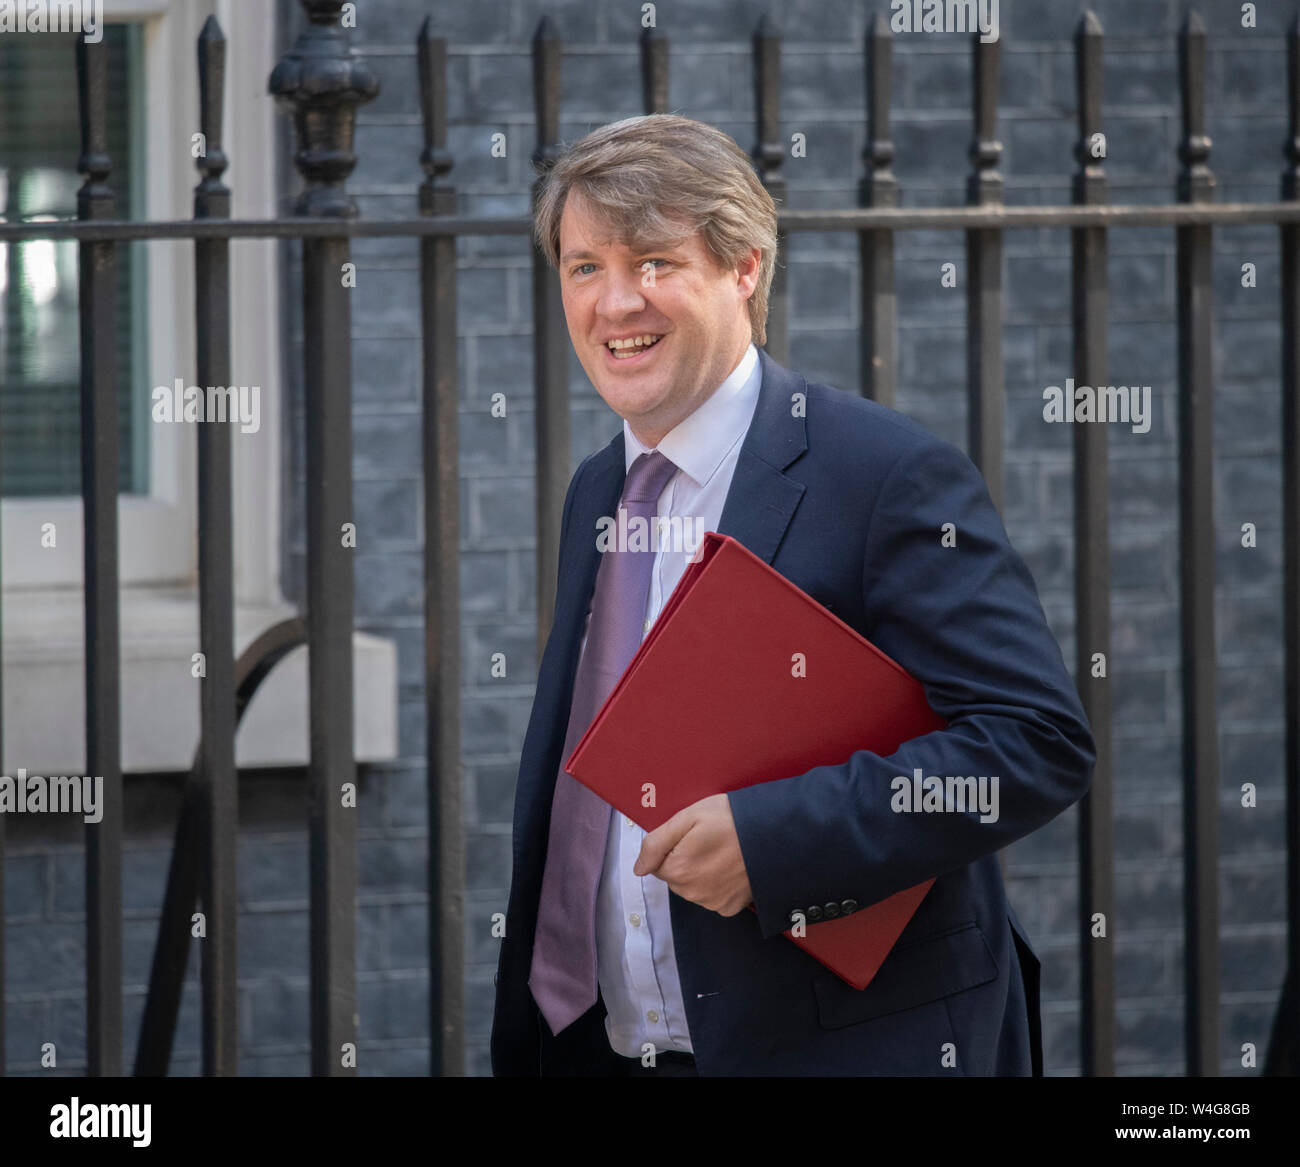 Downing Street, London, UK. 23rd July 2019. Chris Skidmore, Minister of State for Universities, Science, Research and Innovation arrives in Downing Street for final cabinet meeting before Boris Johnson is announced as new PM. Credit: Malcolm Park/Alamy Live News. Stock Photo